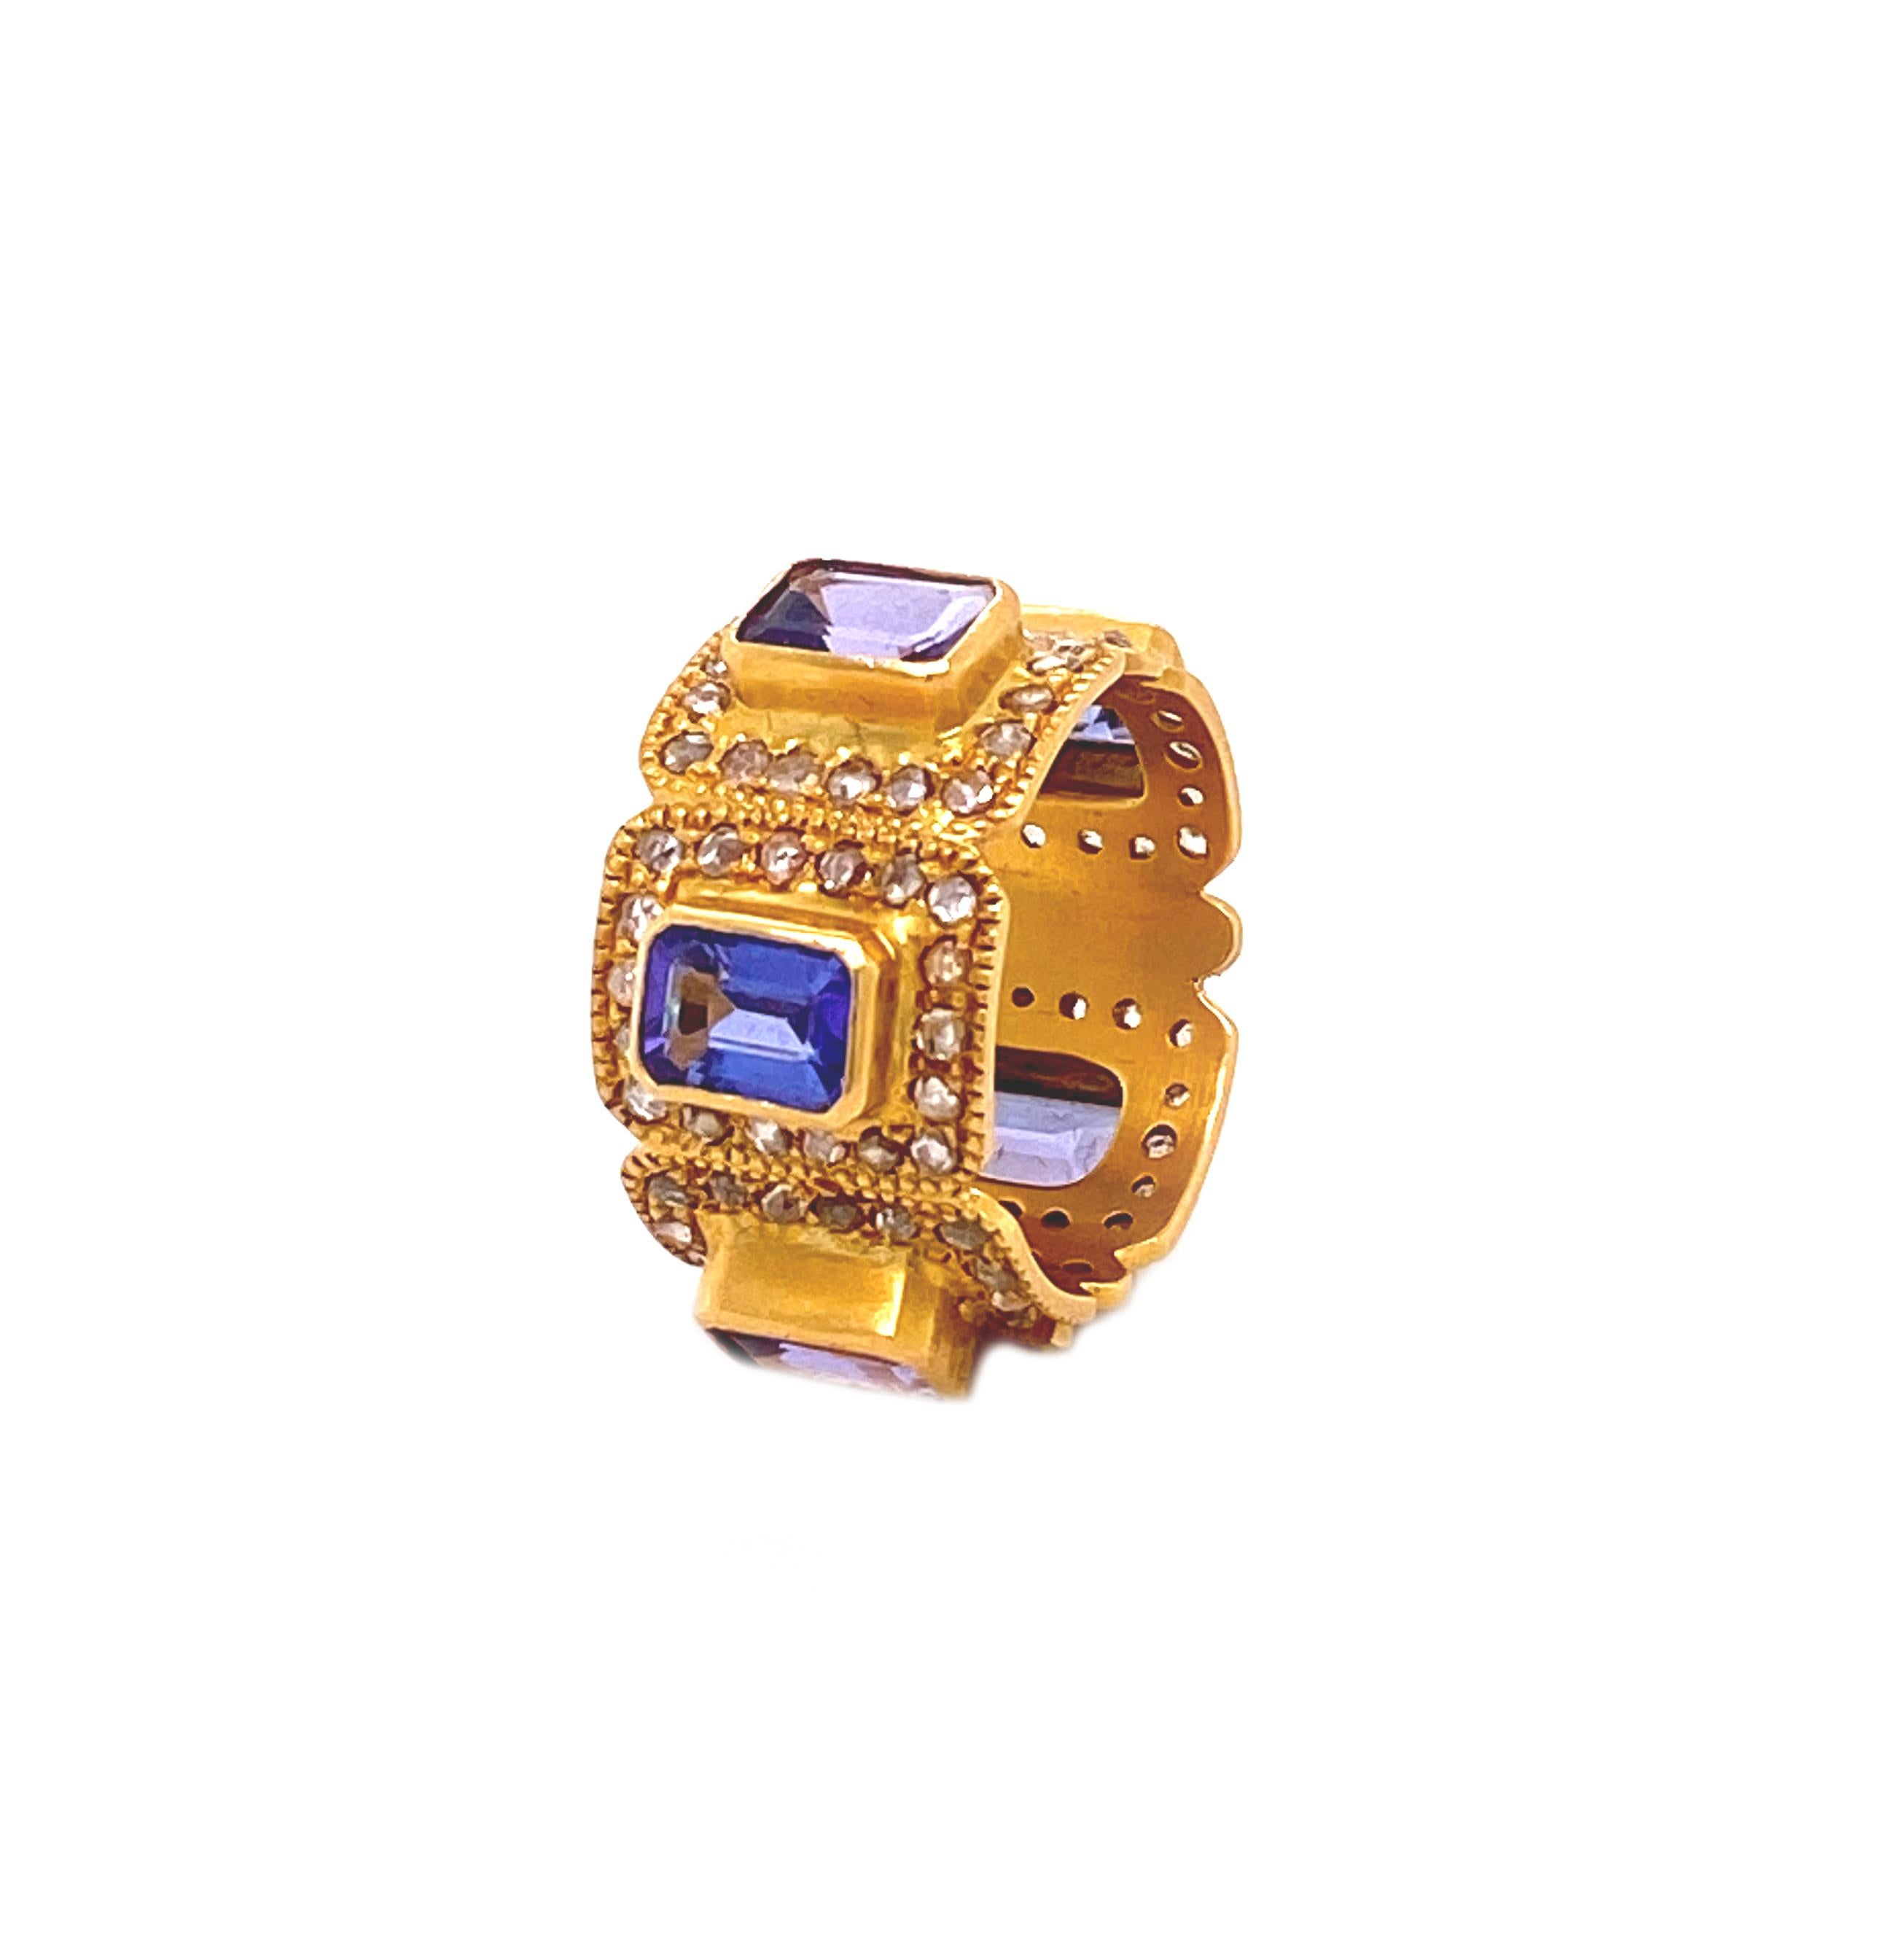 Bold and stunning Art Deco Style Mosaic Ring set in 20 Karat Yellow Gold and 4.15cts Tanzanite with Rose Cut Diamonds at 1.22cts. This beautiful statement ring brought to you from the Luminosity collection of Coomi's, which consists of bold design